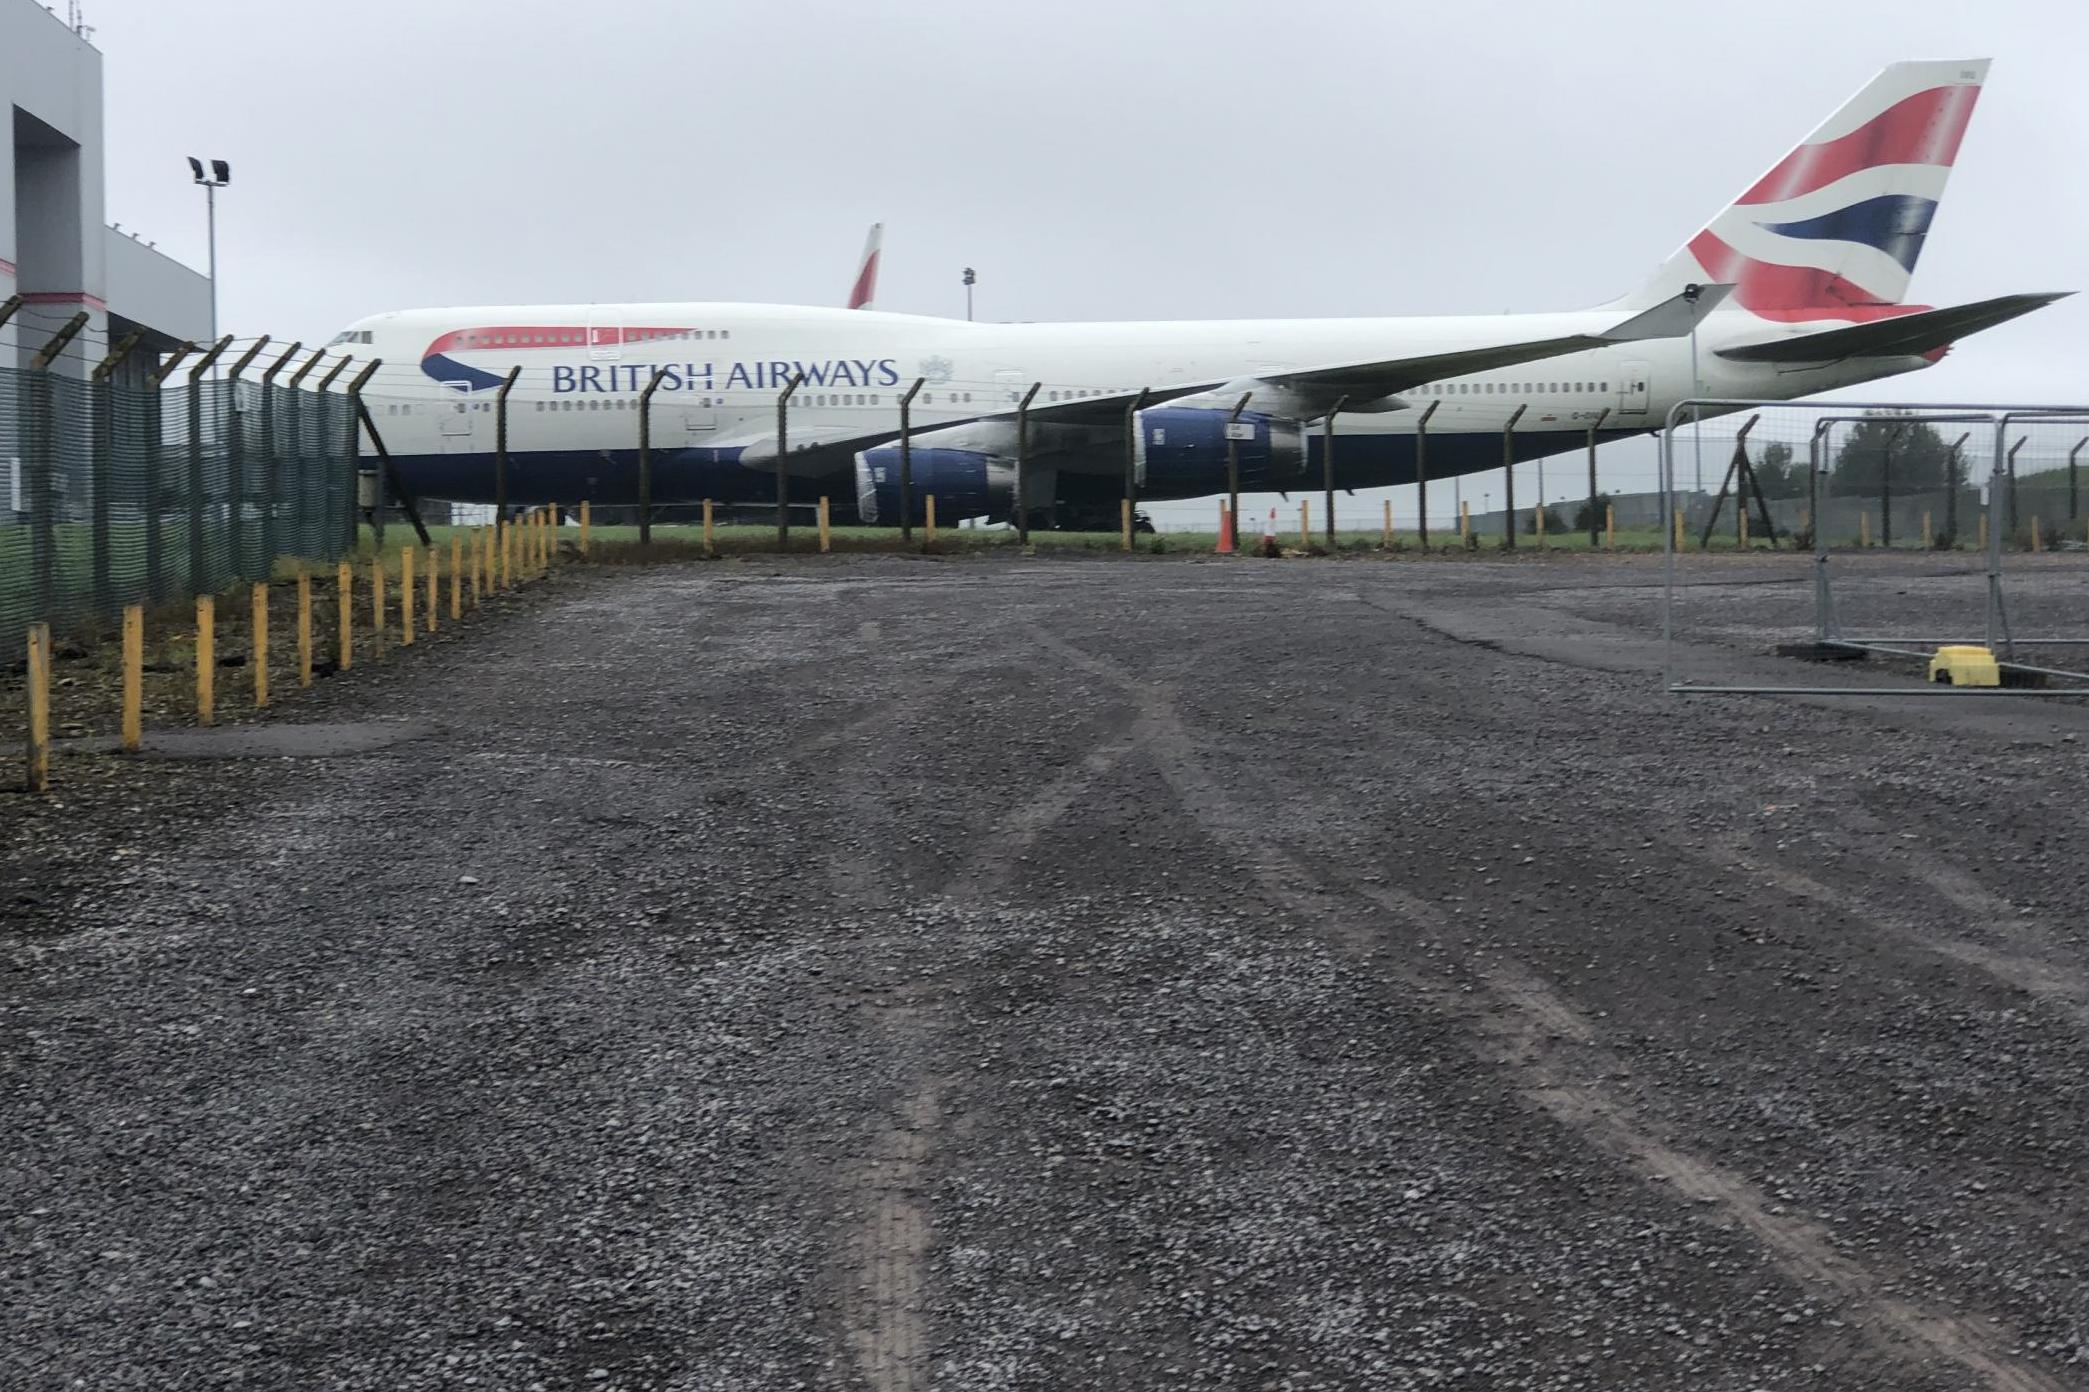 Last call: a soon-to-be-scrapped British Airways Boeing 747 at Cardiff airport